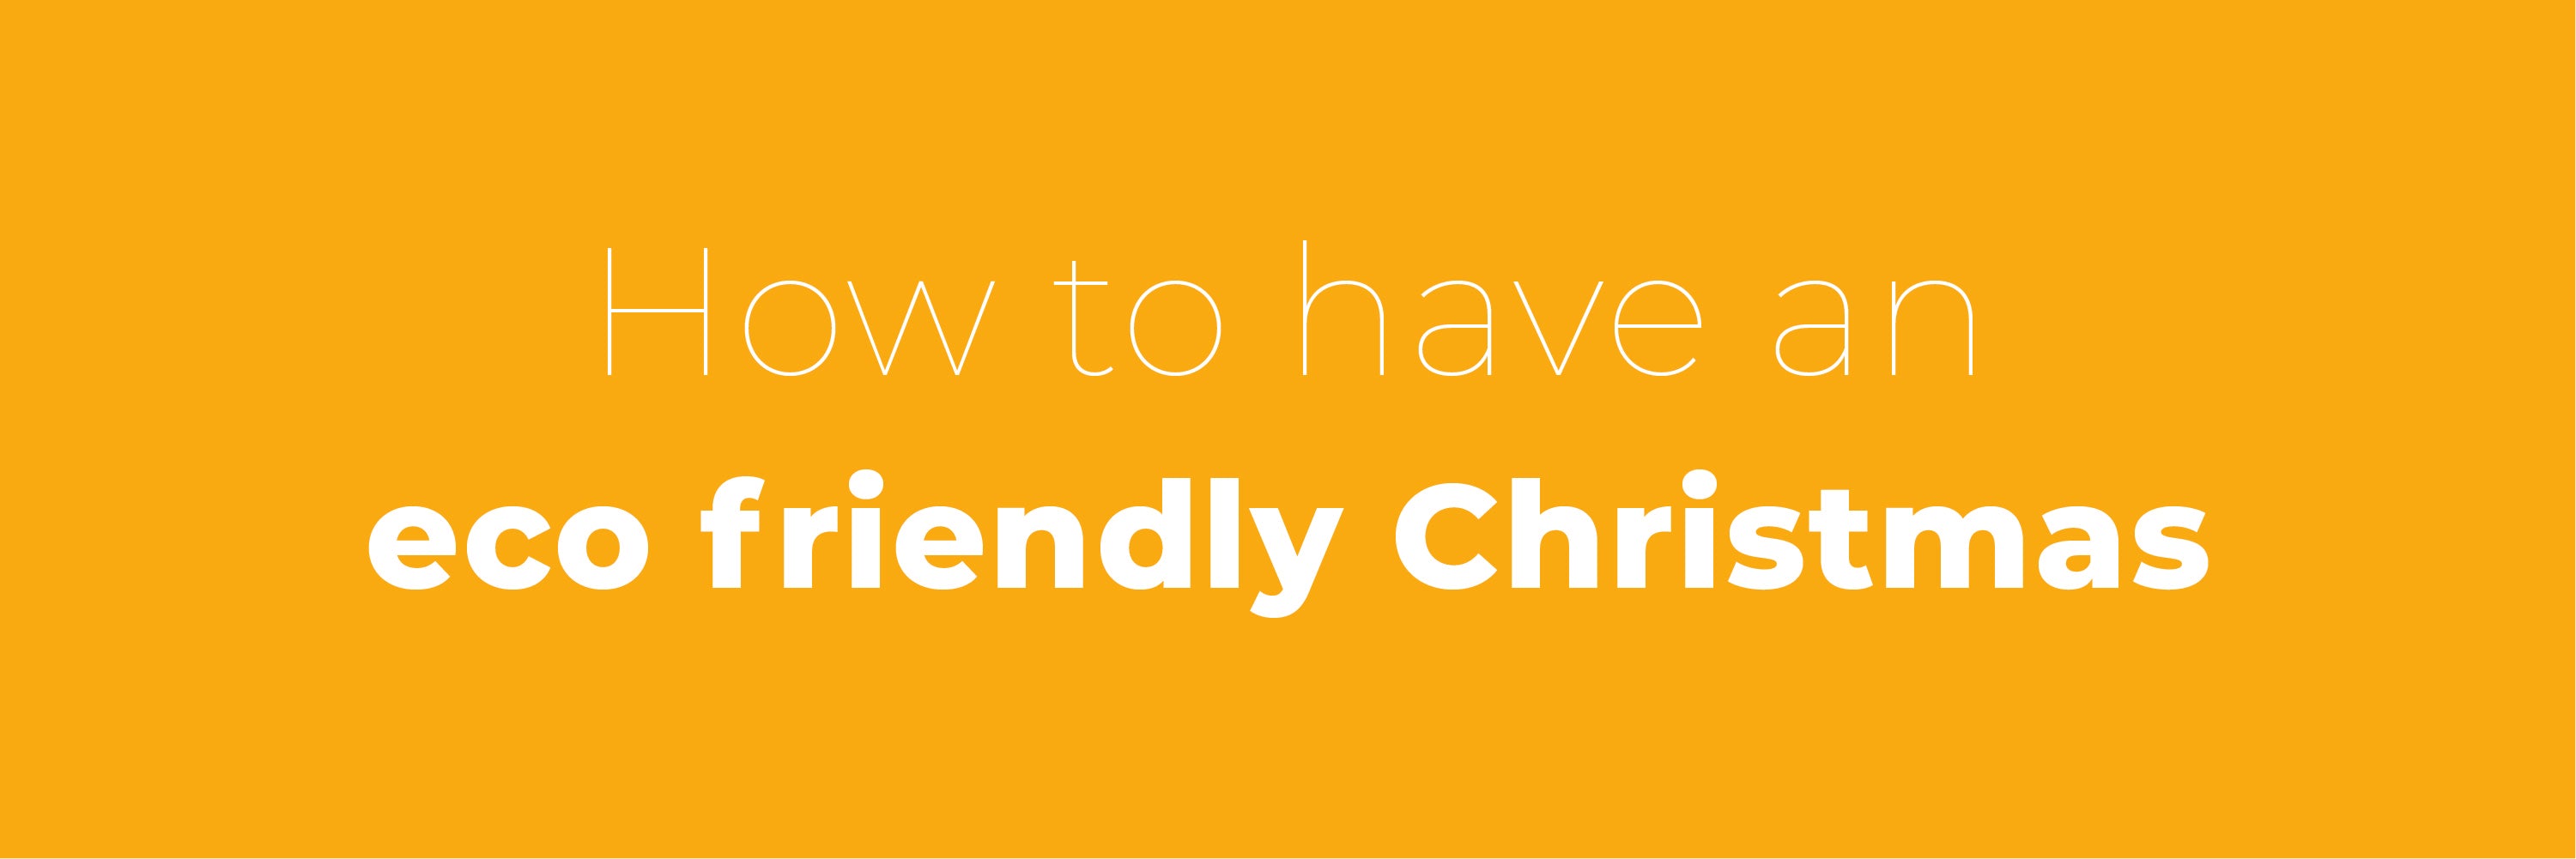 How to have an eco friendly Christmas